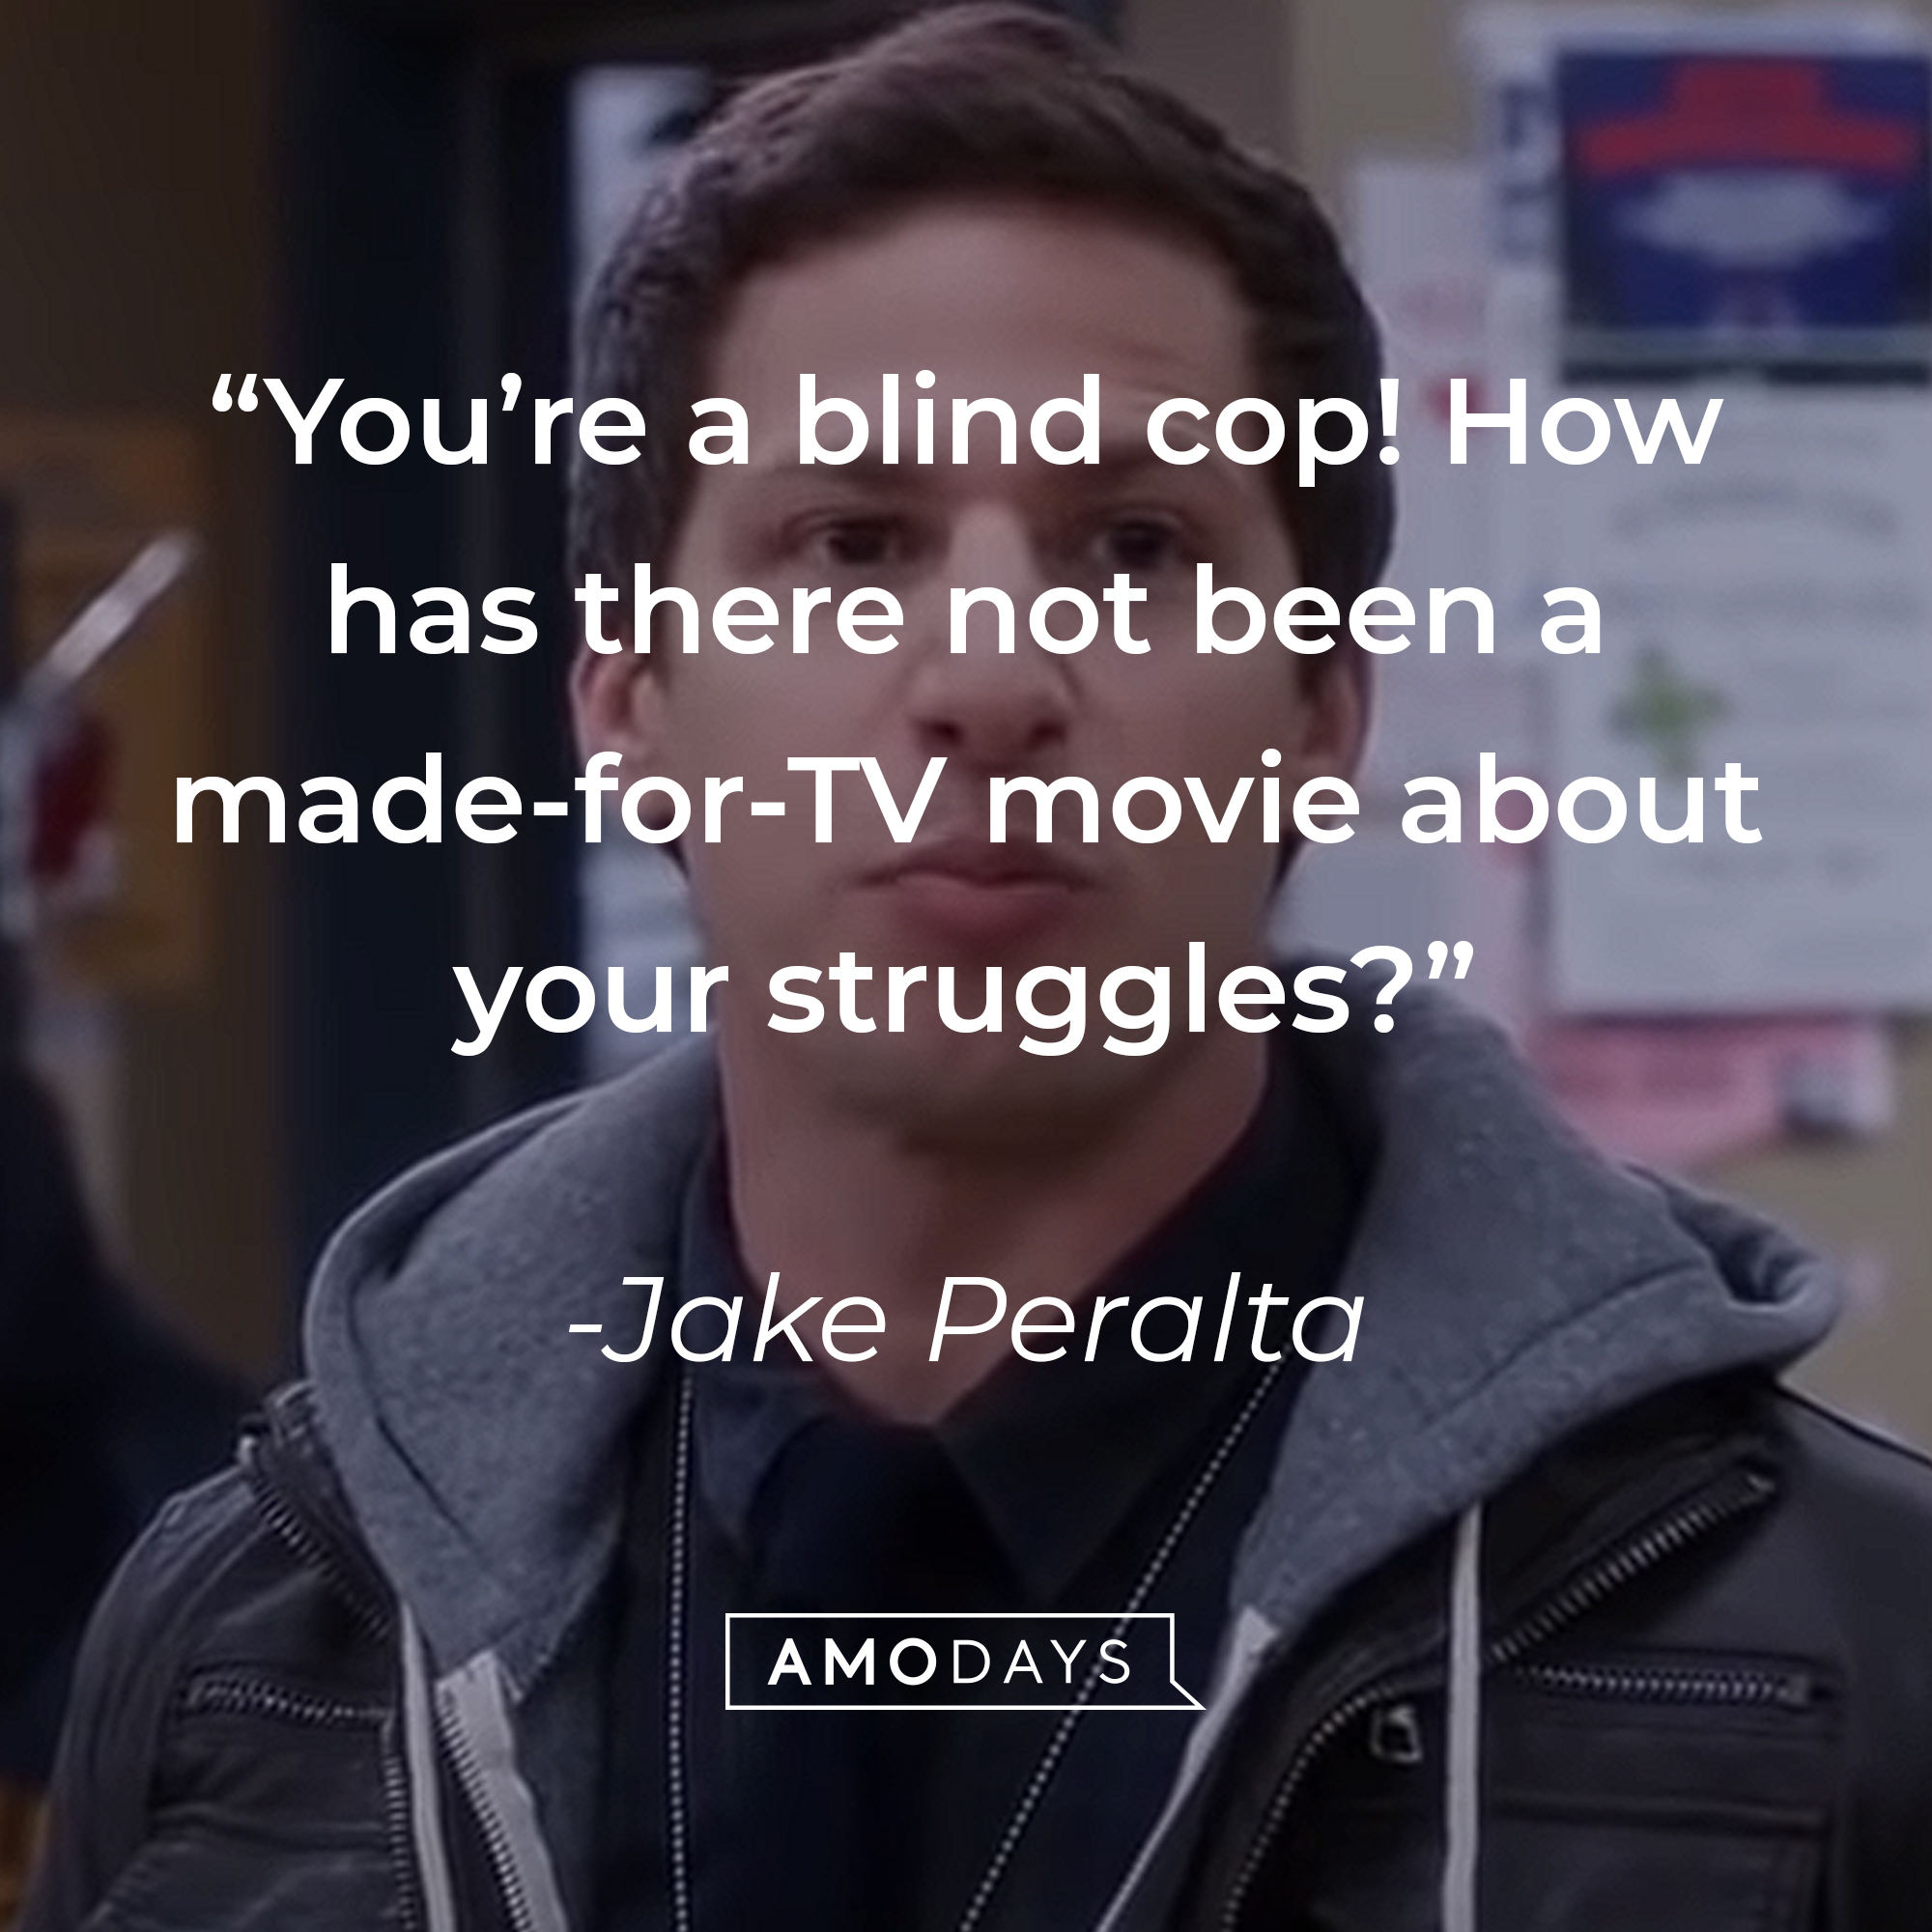 A picture of Jake Peralta with his quote: “You’re a blind cop! How has there not been a made-for-TV movie about your struggles?” |Source: youtube.com/NBCBrooklyn99